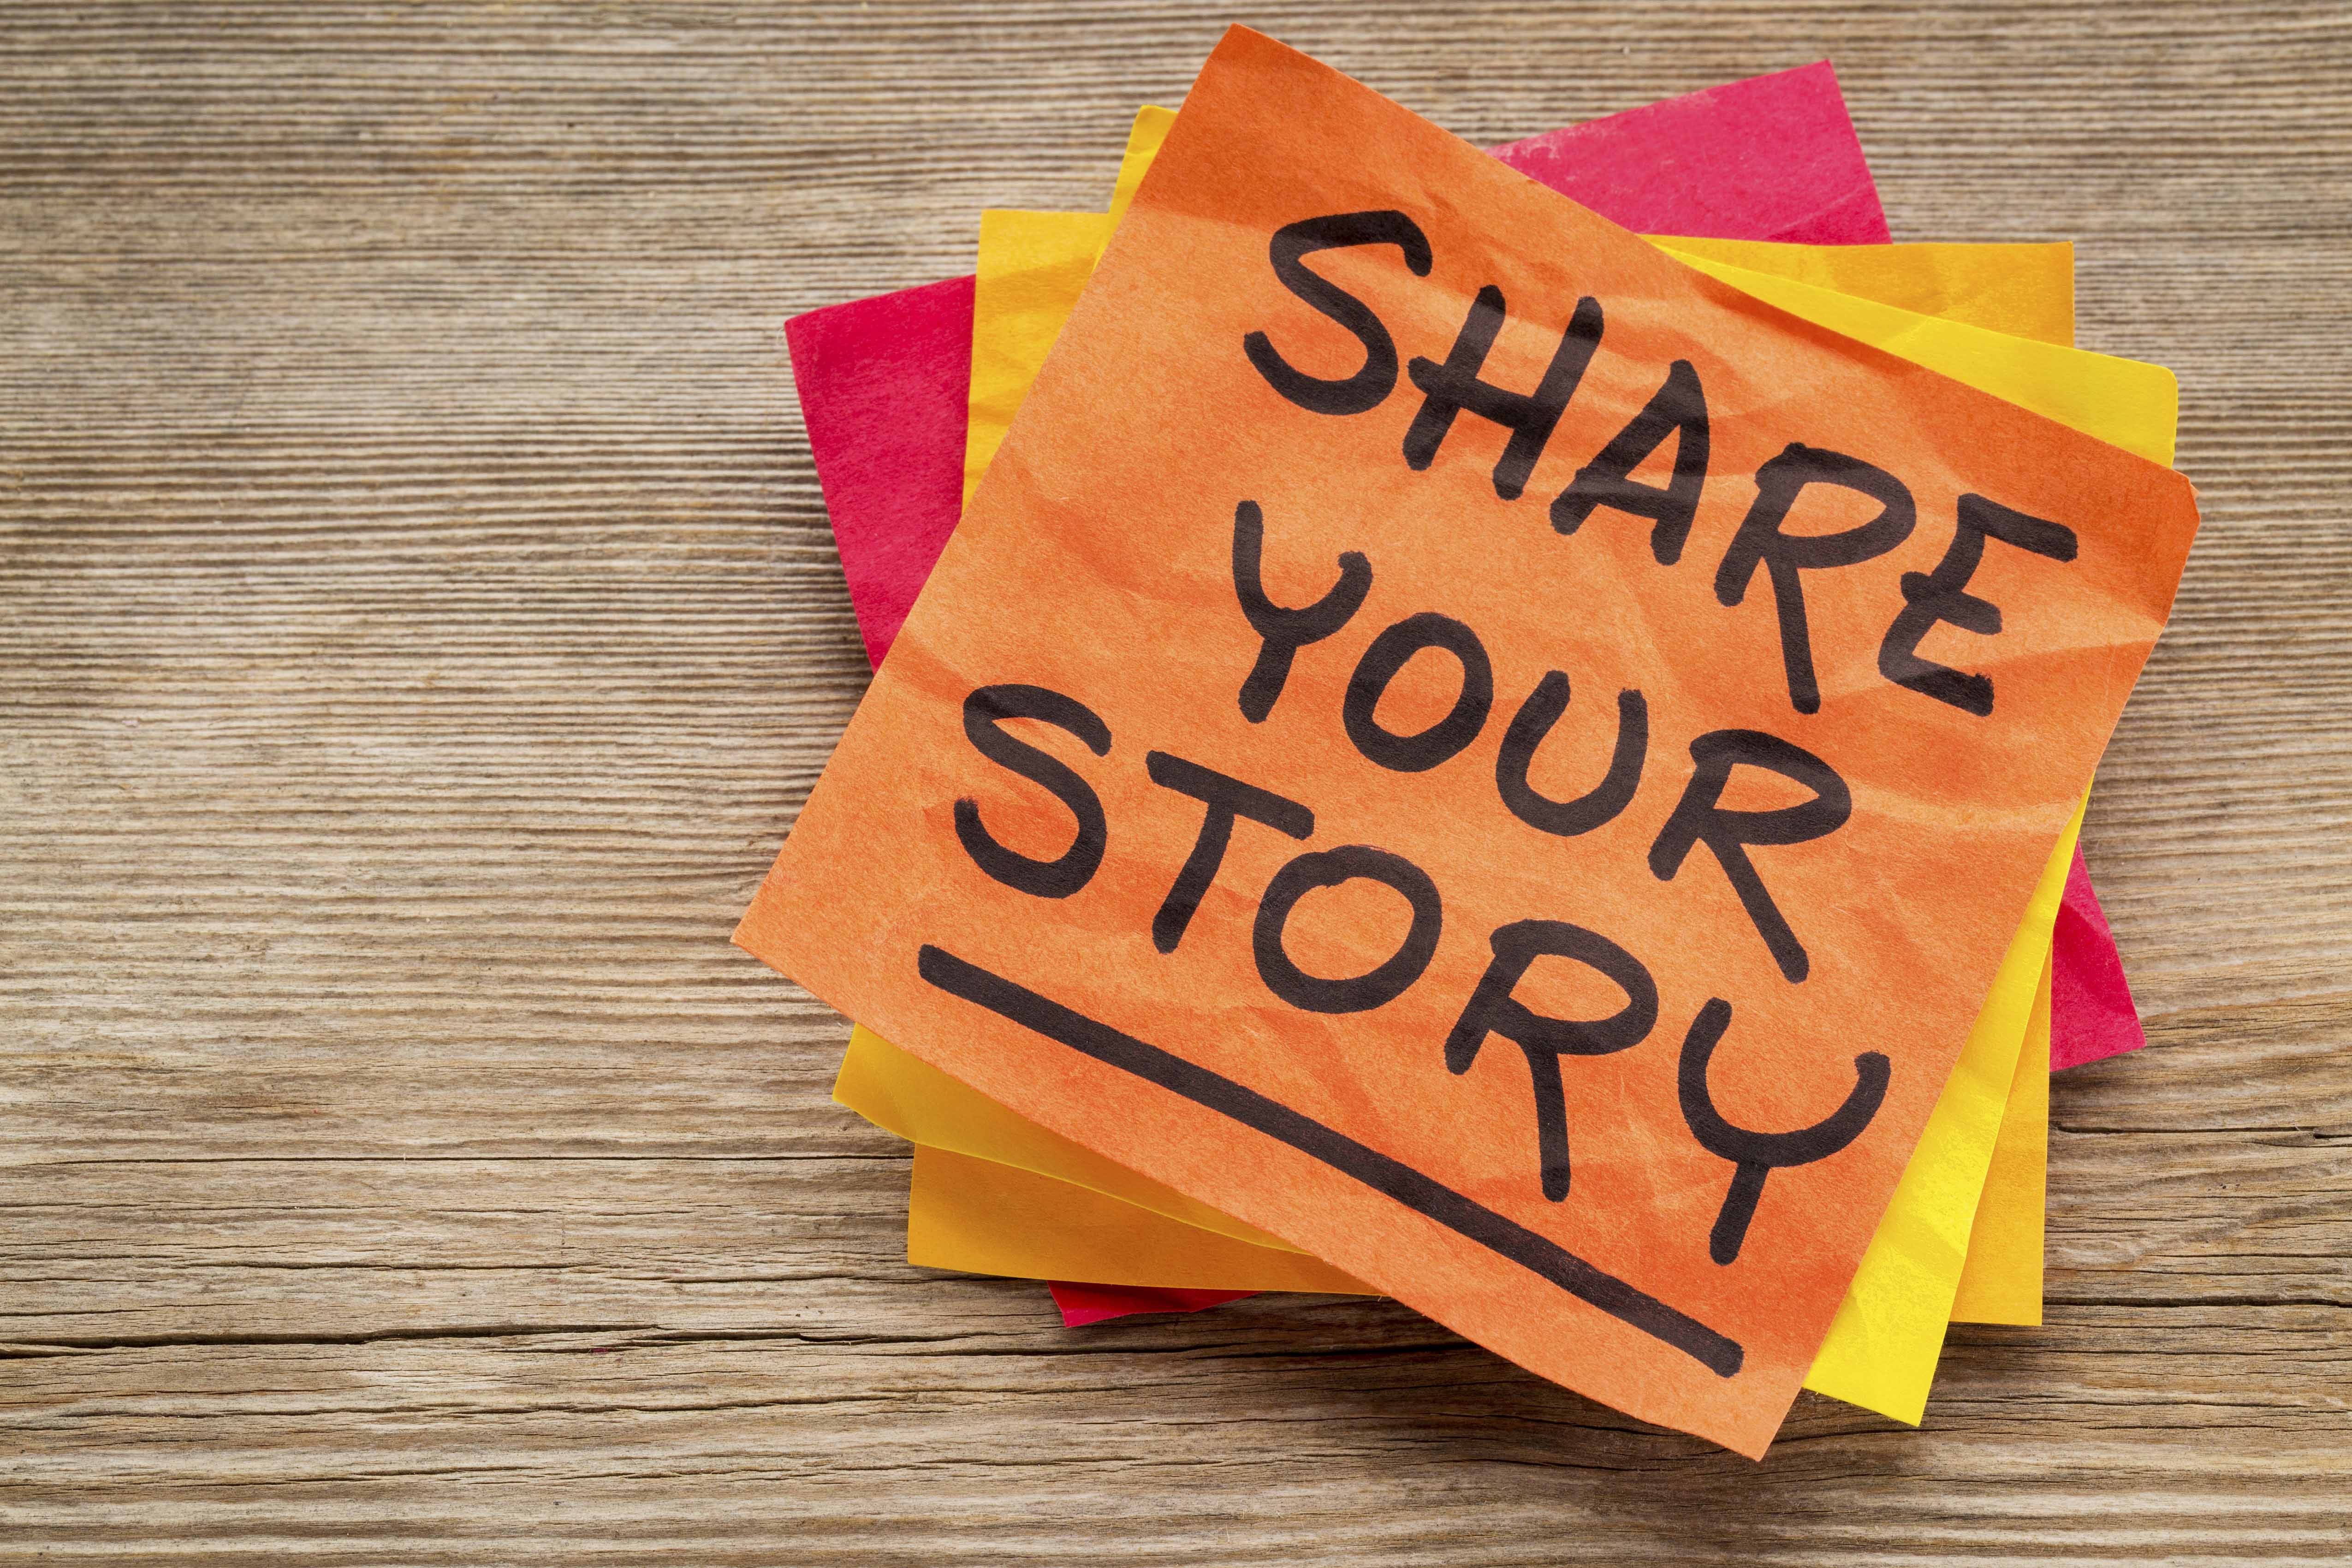 Note that says share your story suggestion on a sticky note against grained wood.